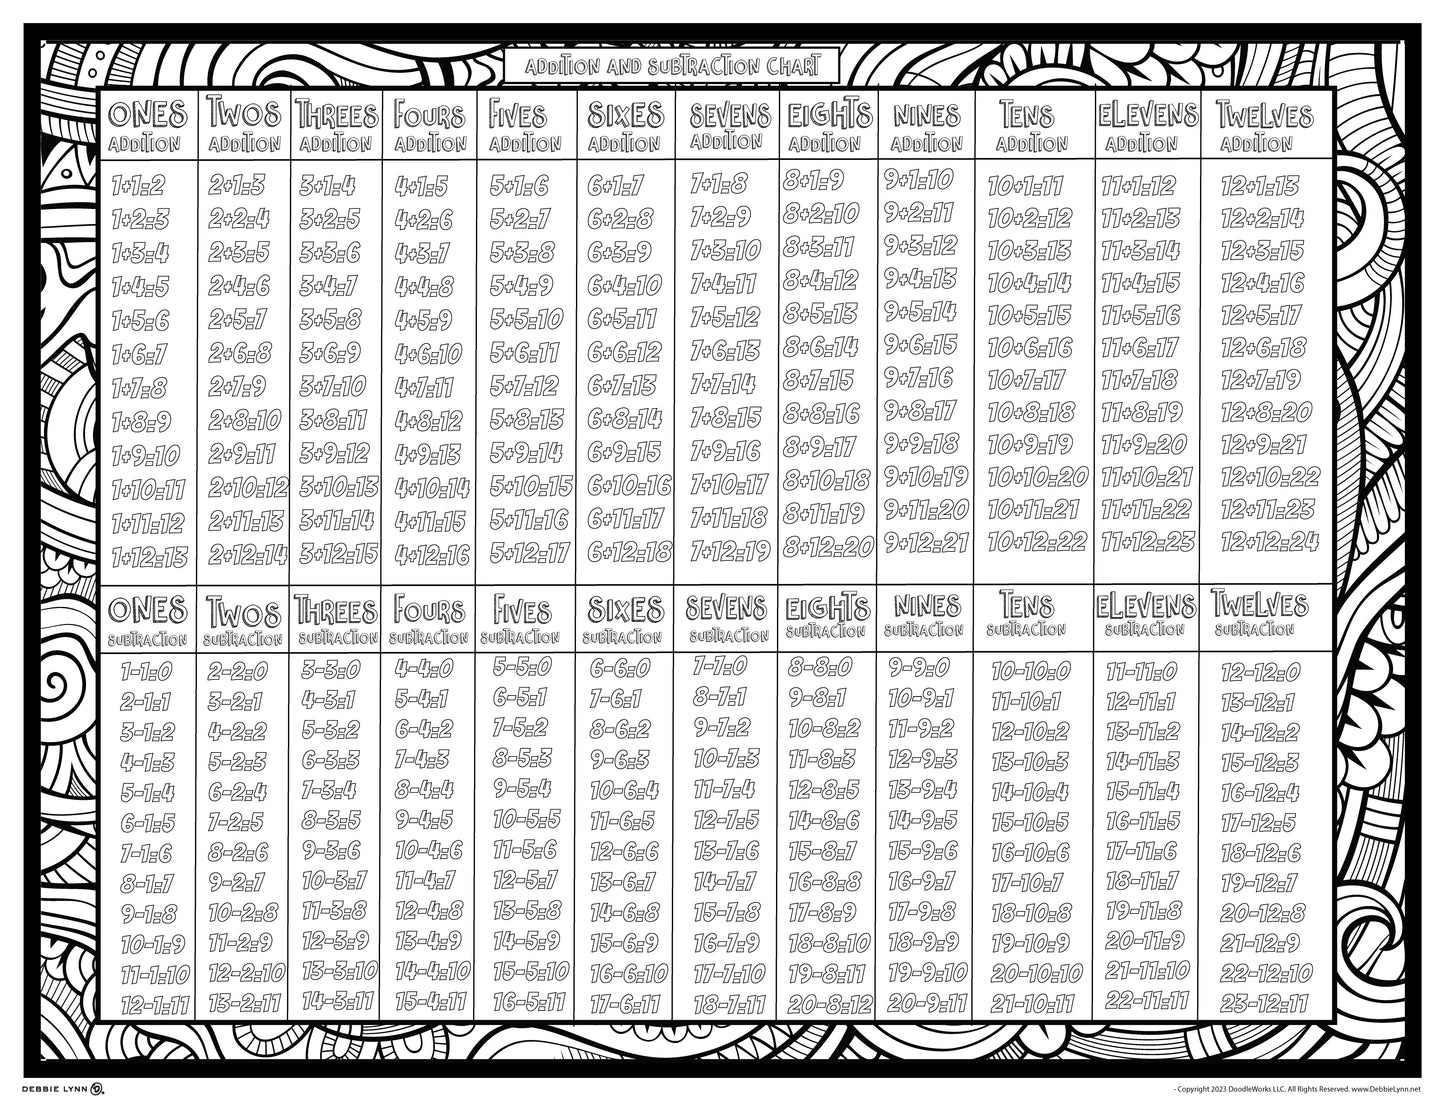 Addition & Subtraction Math Facts Coloring Poster 46x60"